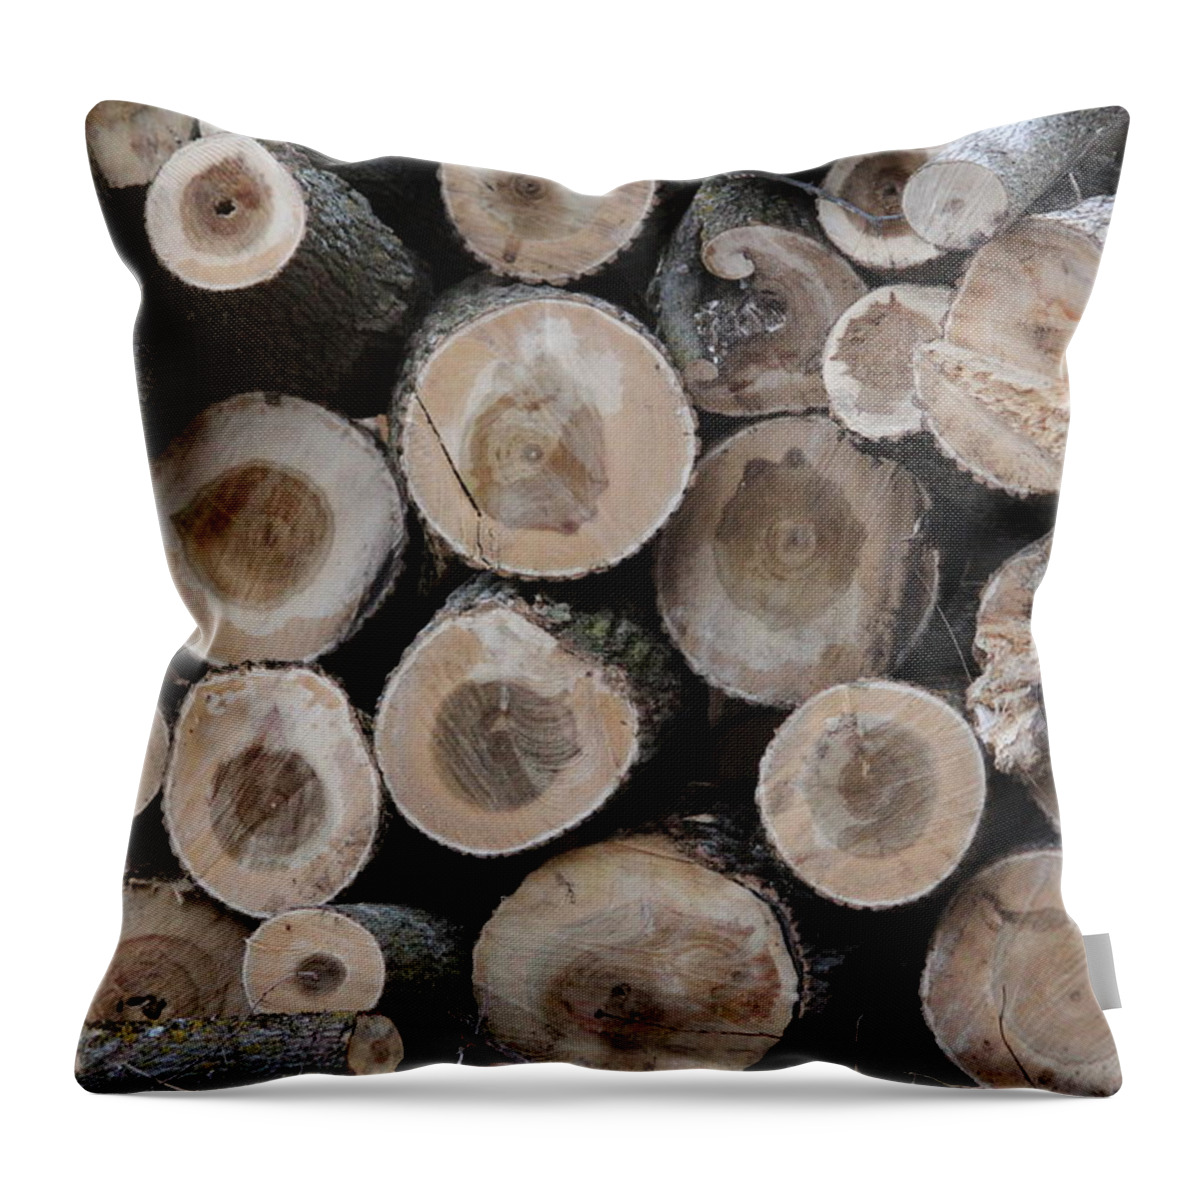 Log Throw Pillow featuring the photograph Log Pile by Callen Harty